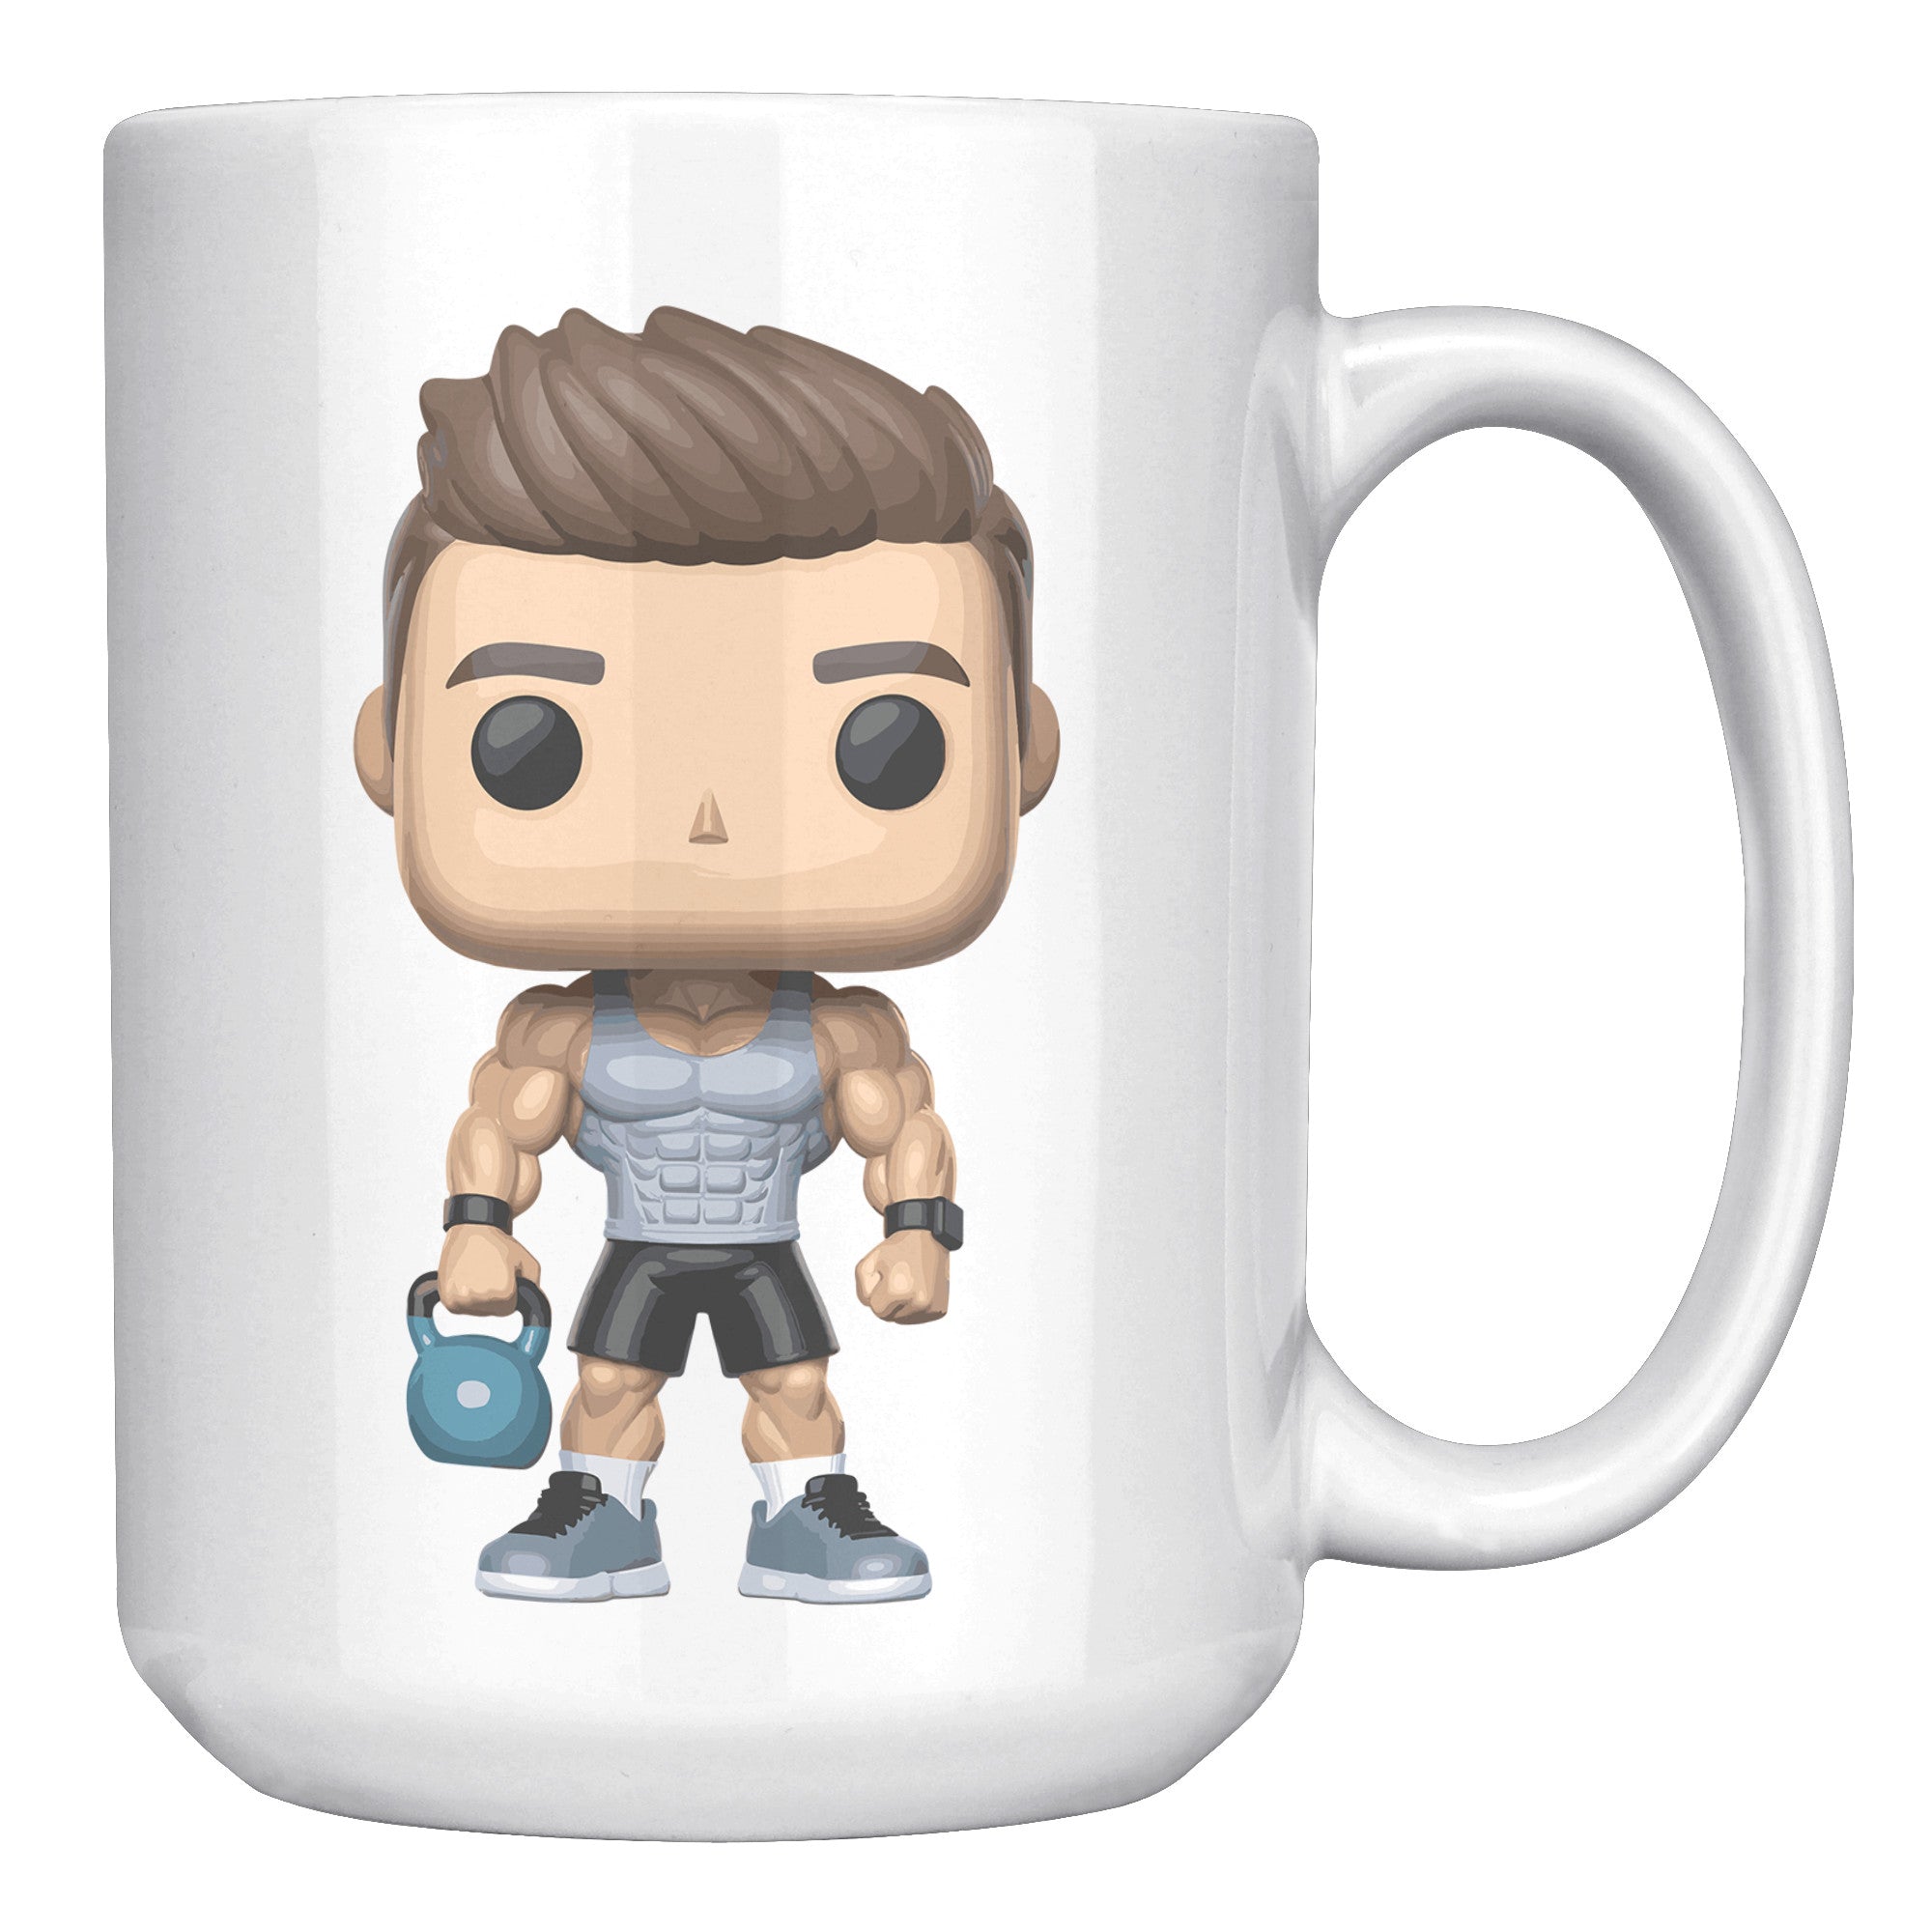 "CrossFit Funko Pop Style Mug - Male Fitness Enthusiast Coffee Cup - Unique Gift for Gym Buffs - Fun Workout-Inspired Drinkware" - A1